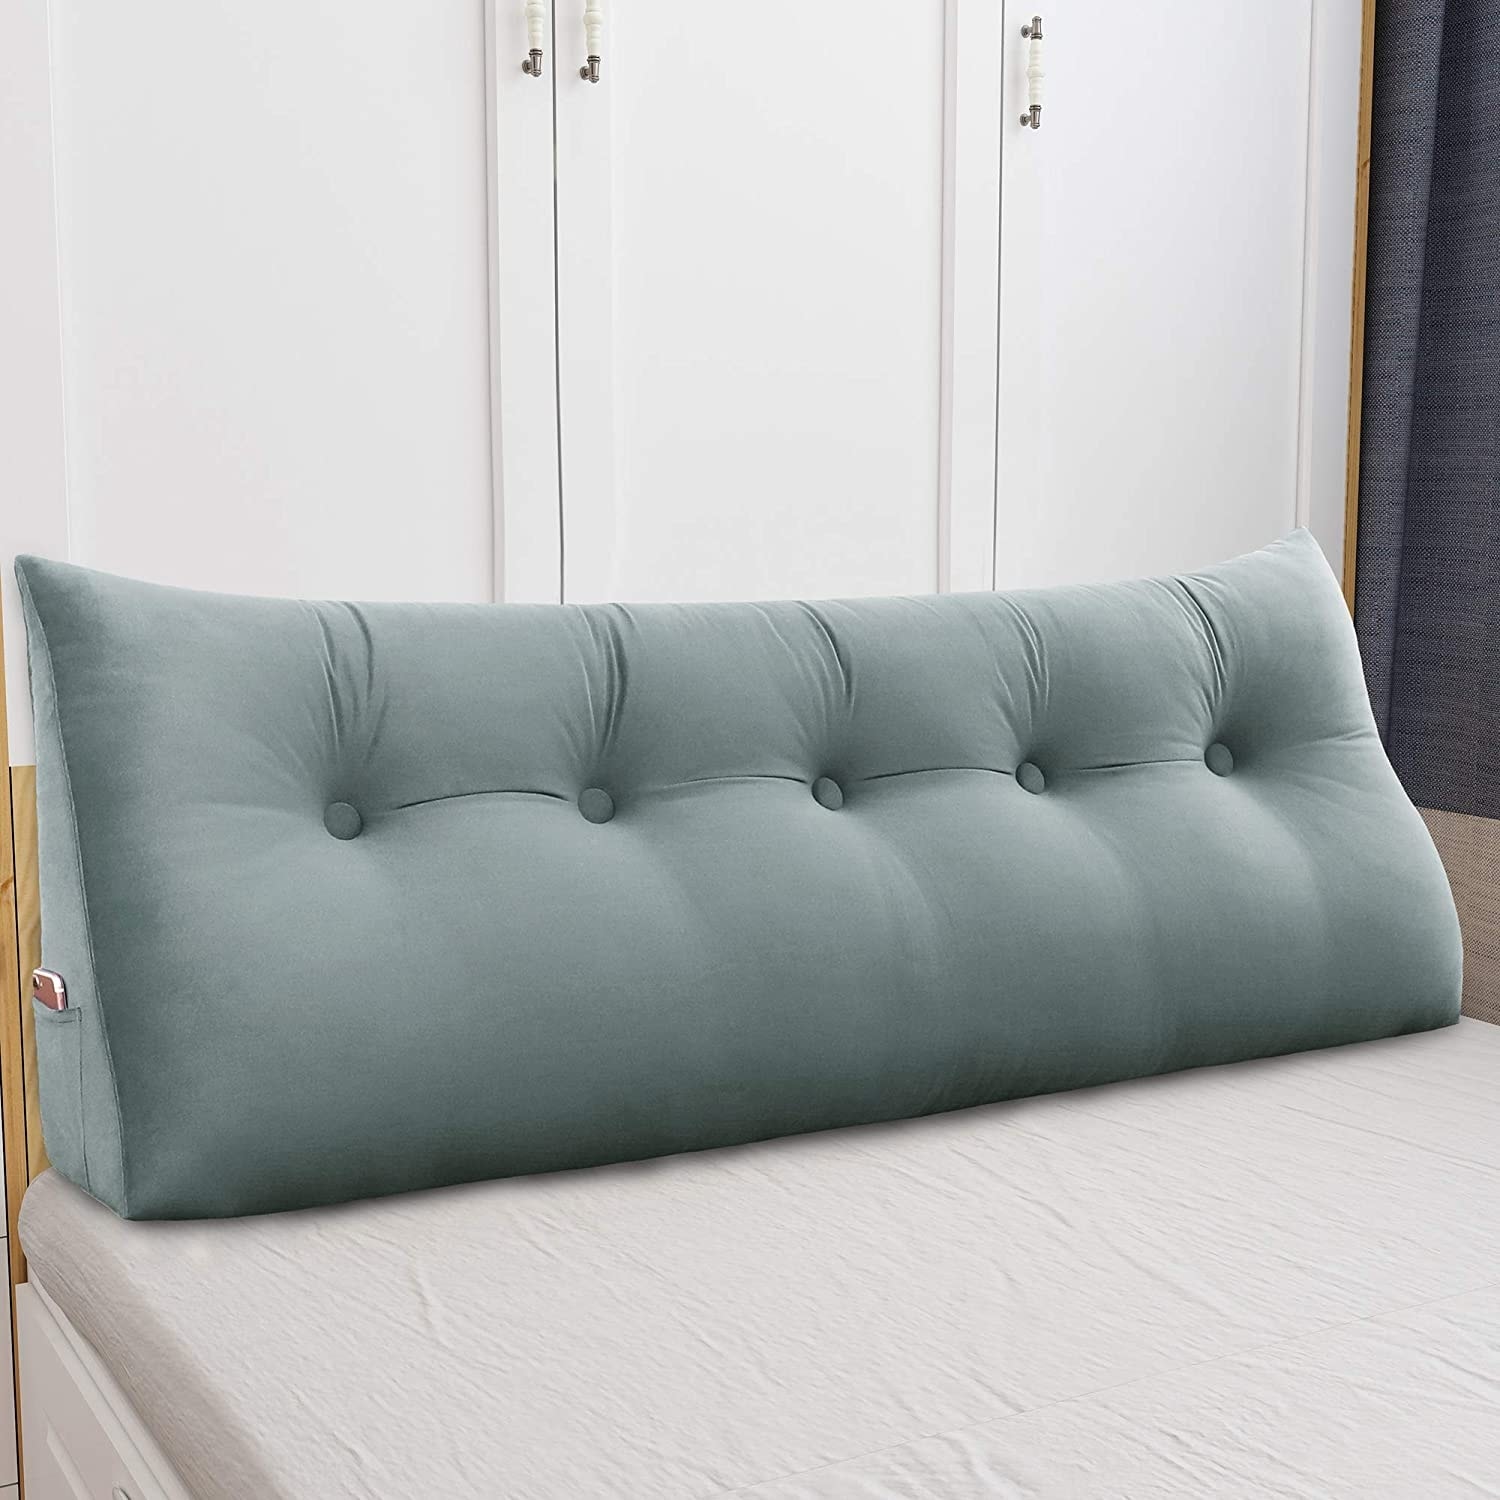 WOWMAX Bed Rest Wedge Reading Pillow Headboard Back Support Cushion - On  Sale - Bed Bath & Beyond - 34483743